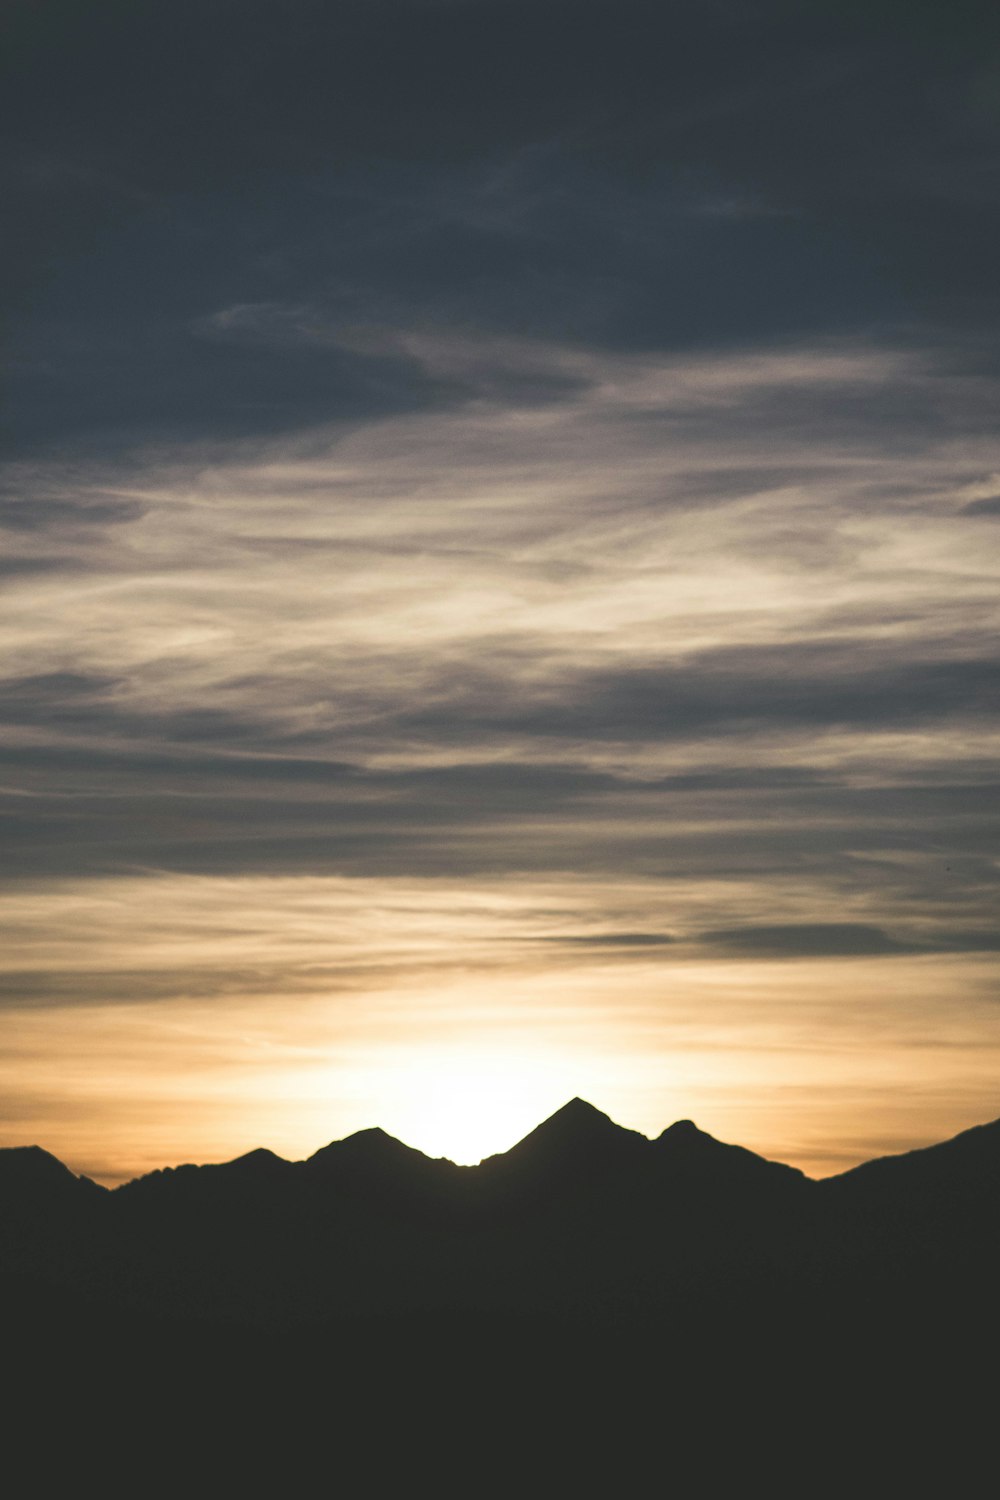 mountain landscape silhouette during sunset